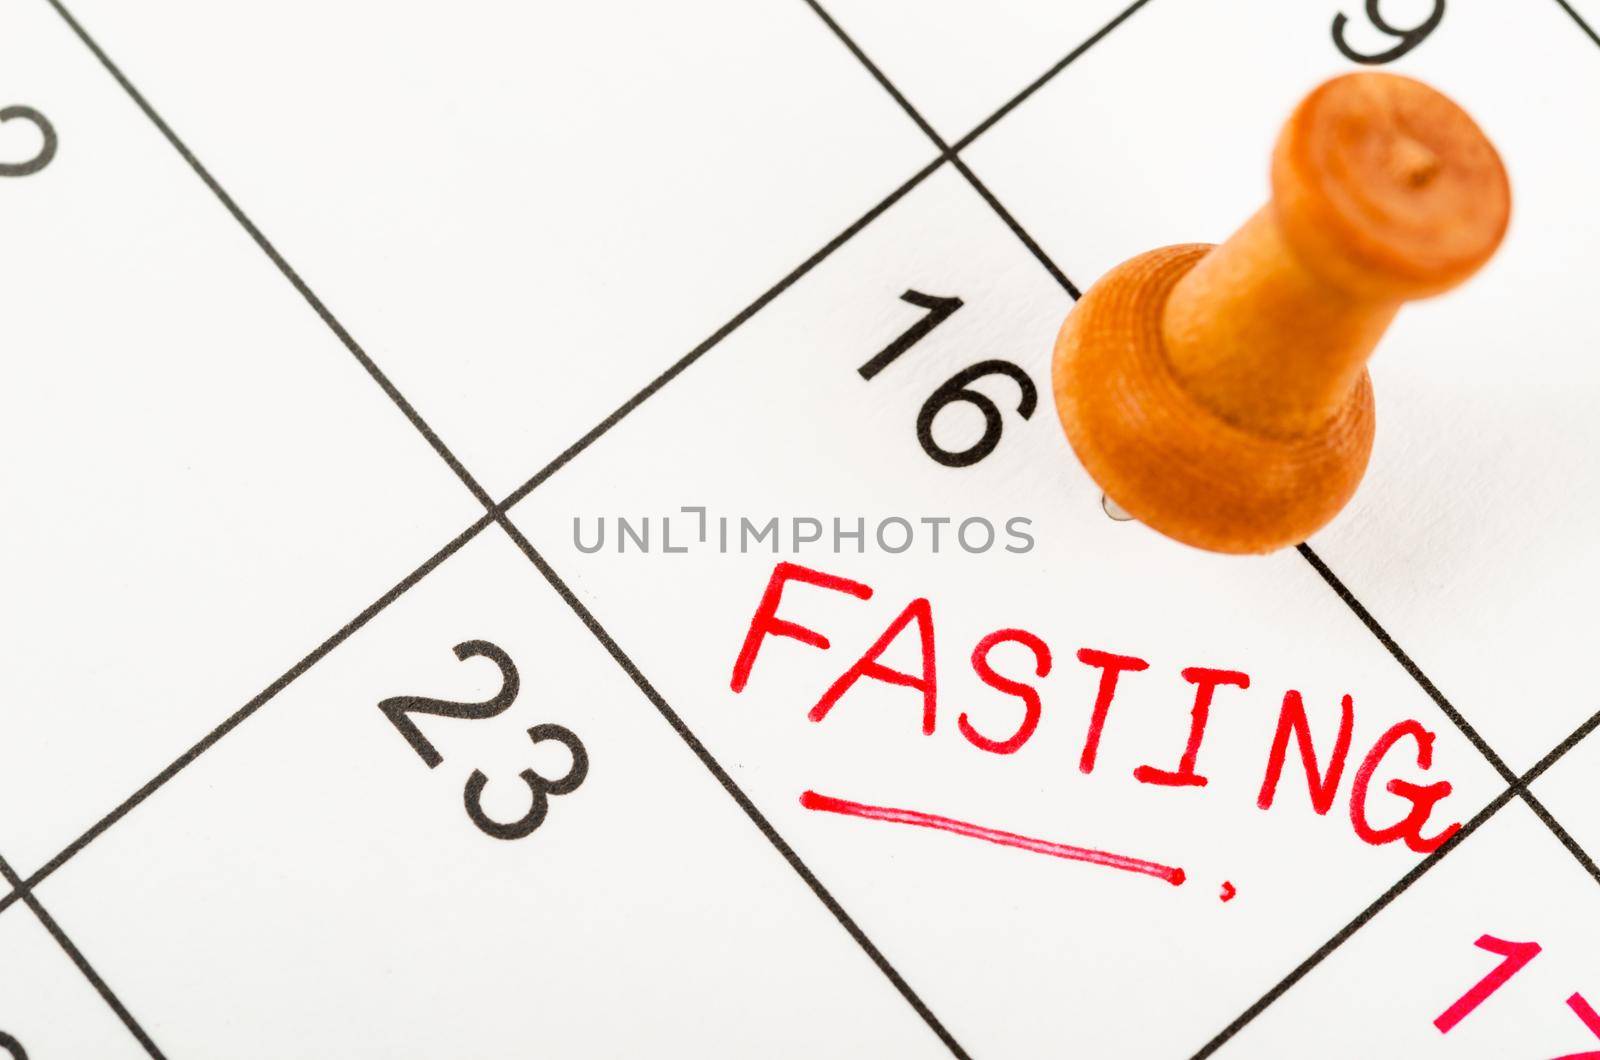 Fasting text writing in a calendar page with wooden pin. by Gamjai